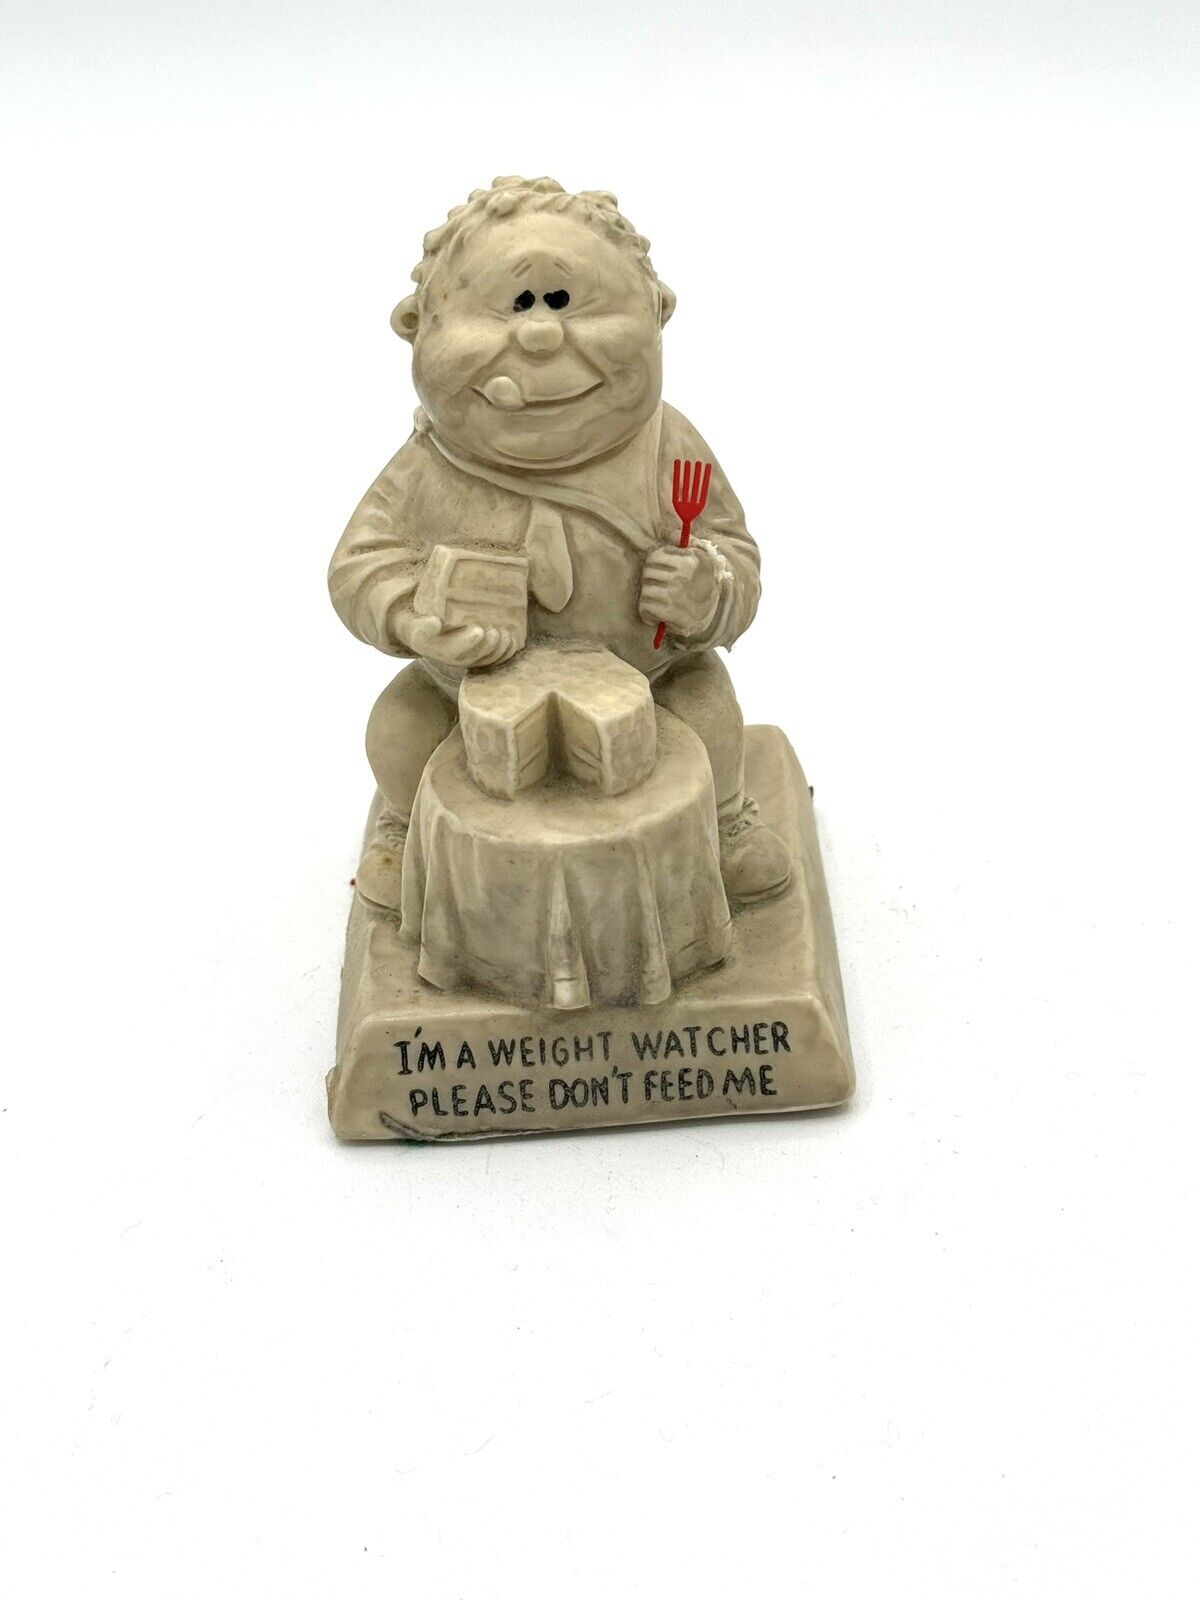 Vintage 1970 Russ & Wallace Berrie Statue Weight Watcher Don't Feed Me funny